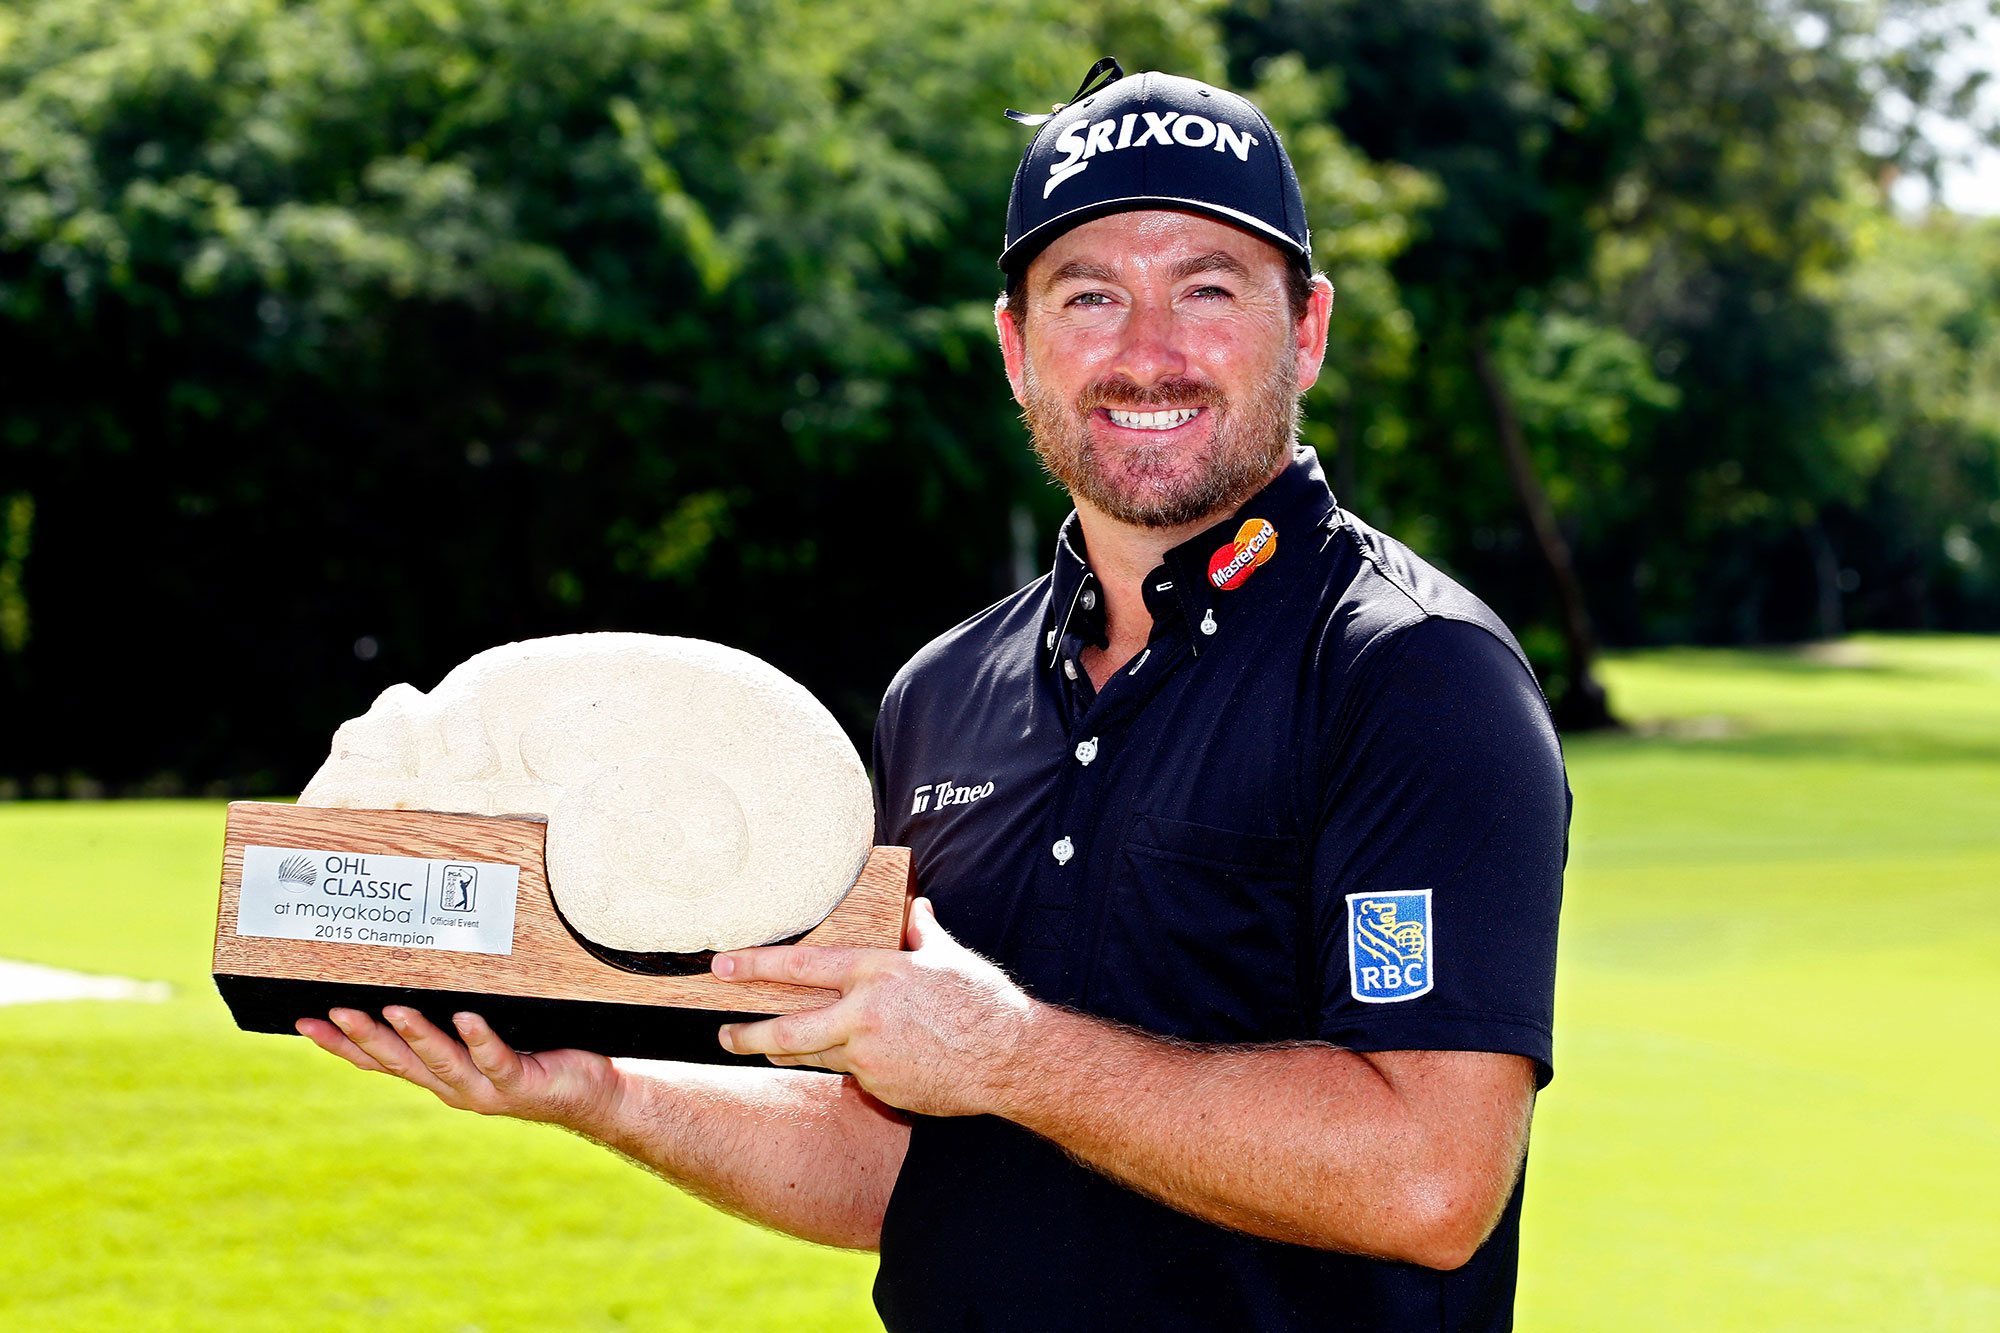 Graeme McDowell with the OHL Classic at Mayakoba trophy (Photo: Getty Images)